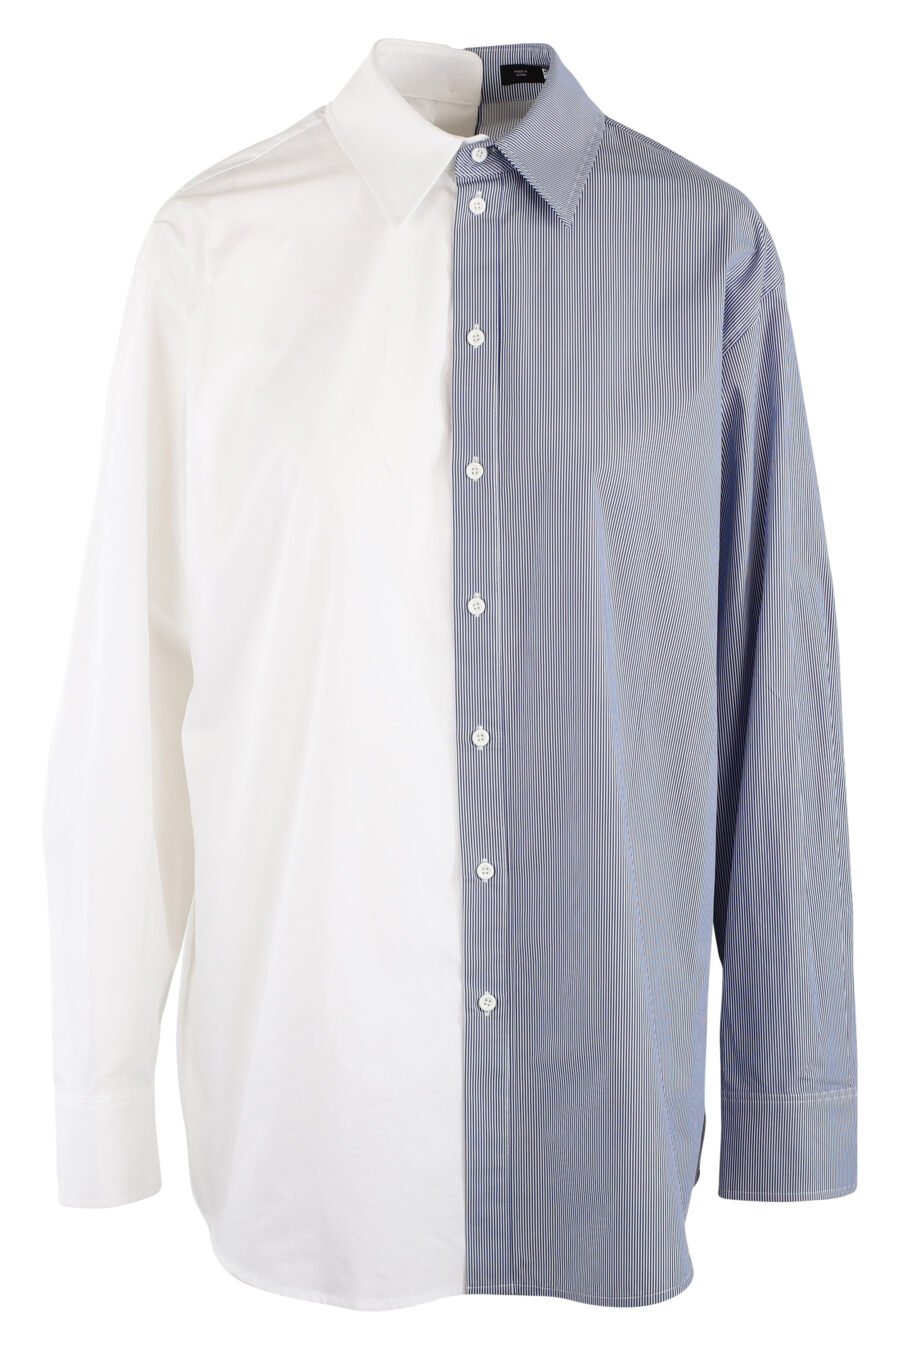 White and blue two-tone shirt - IMG 5494